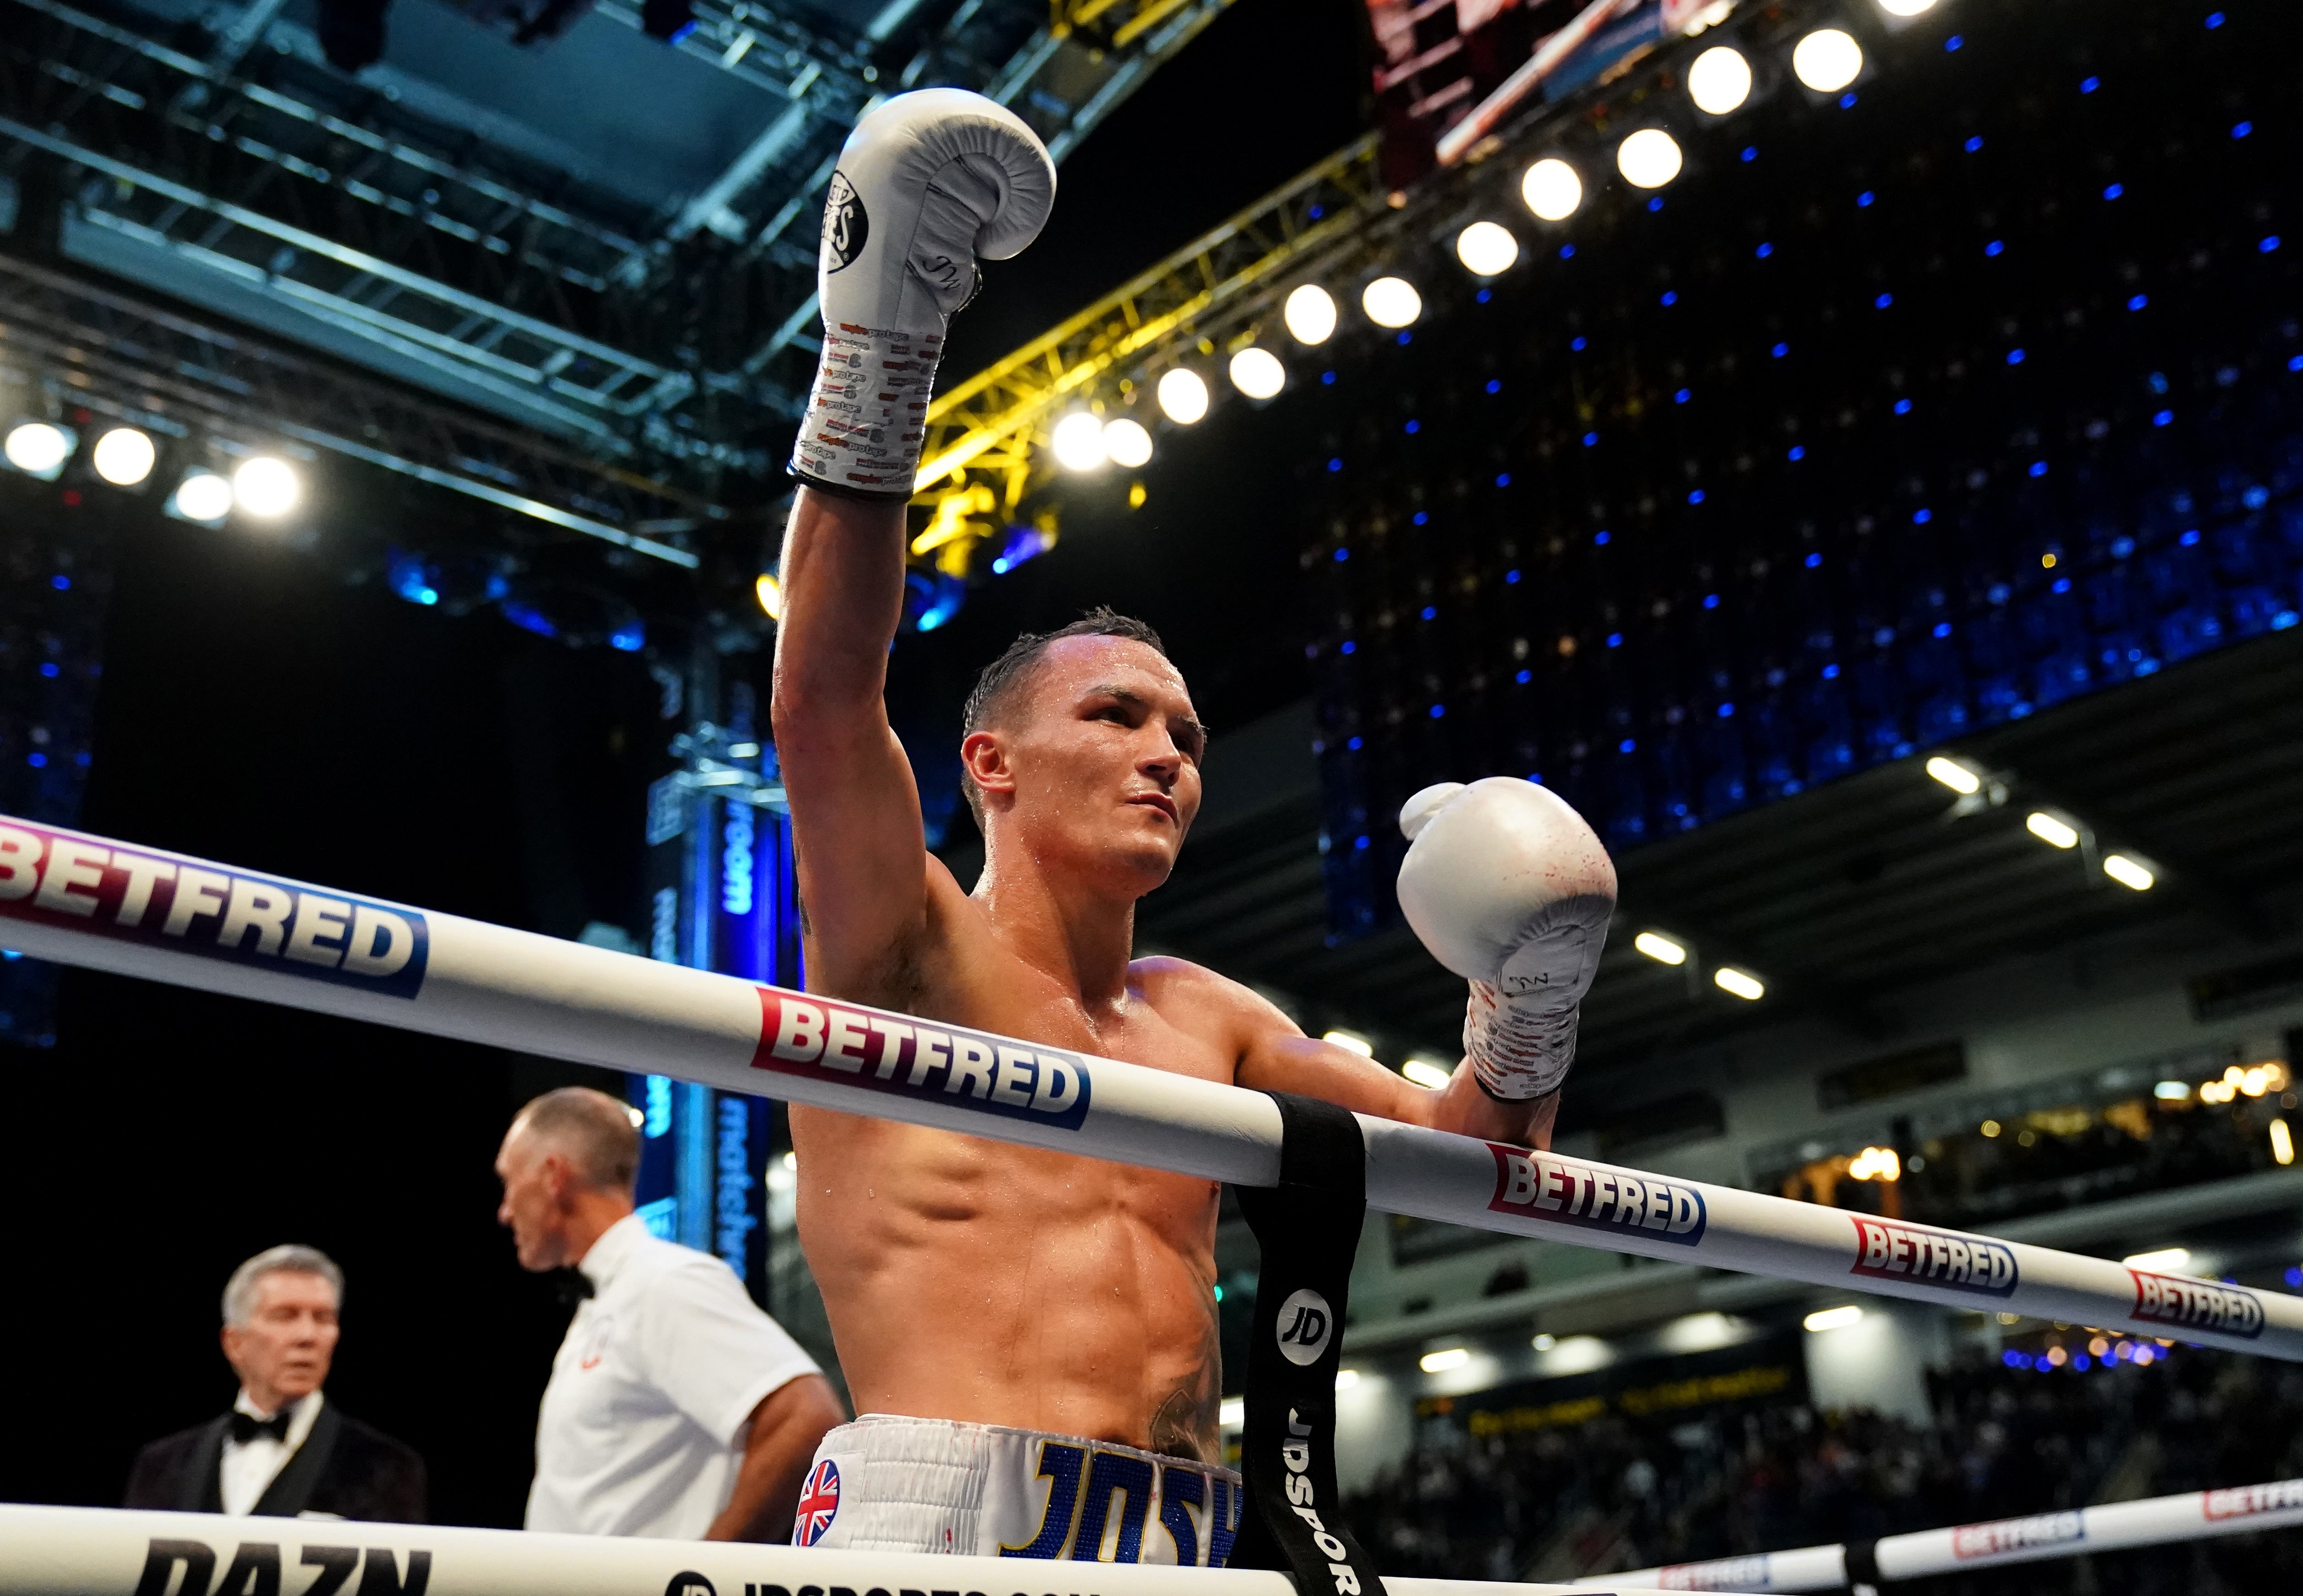 Josh Warrington will look to have his hand raised this weekend (Zac Goodwin/PA)